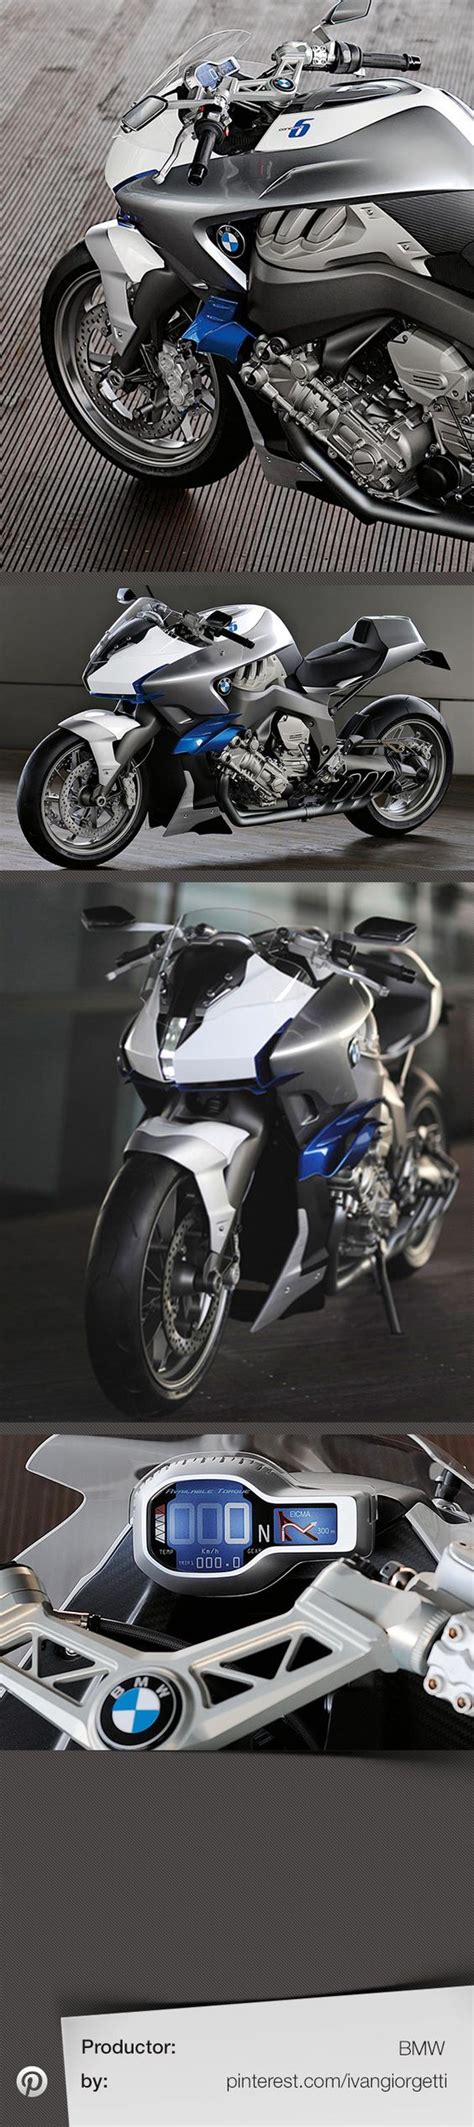 Bmw Concept Bmw And Concept Motorcycles On Pinterest